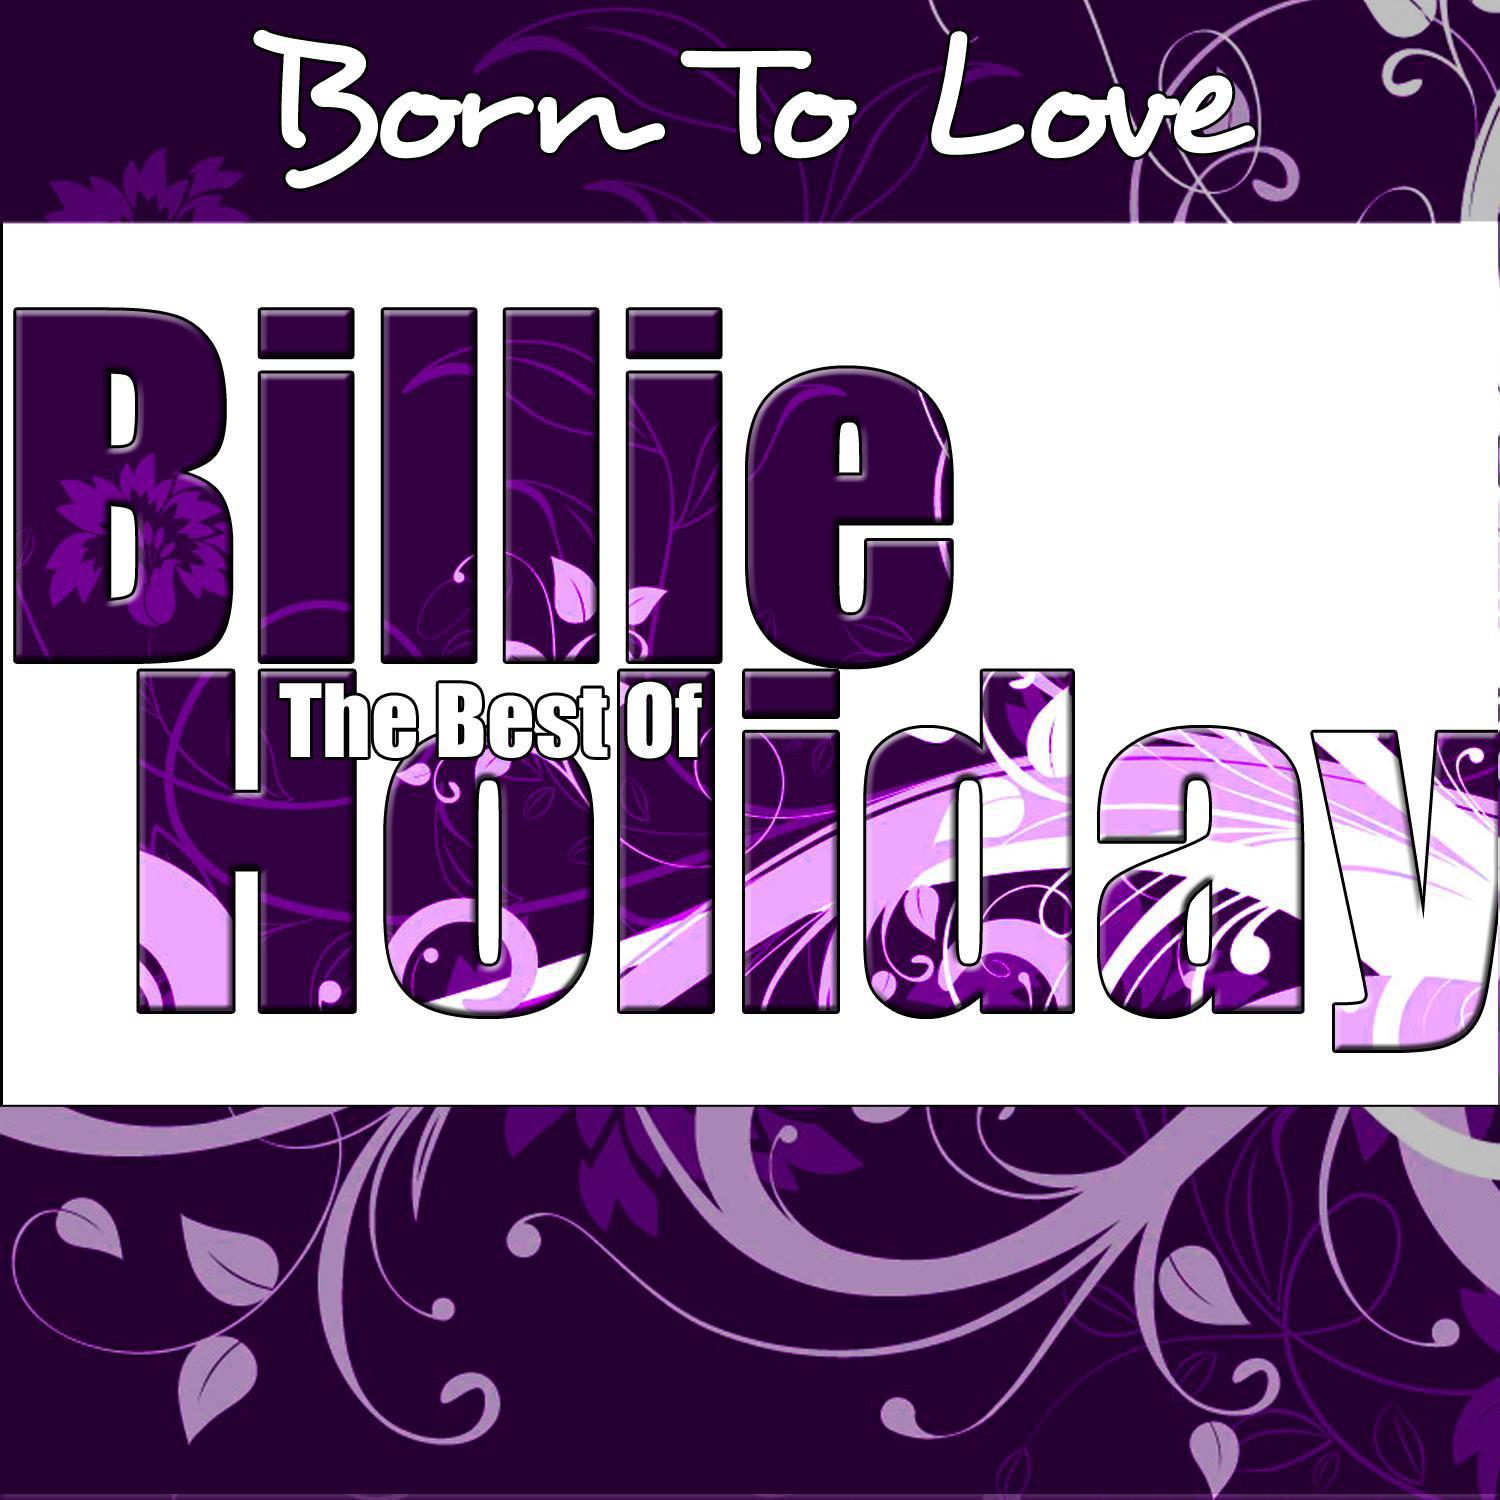 The Best Of Billie Holiday - Born To Love